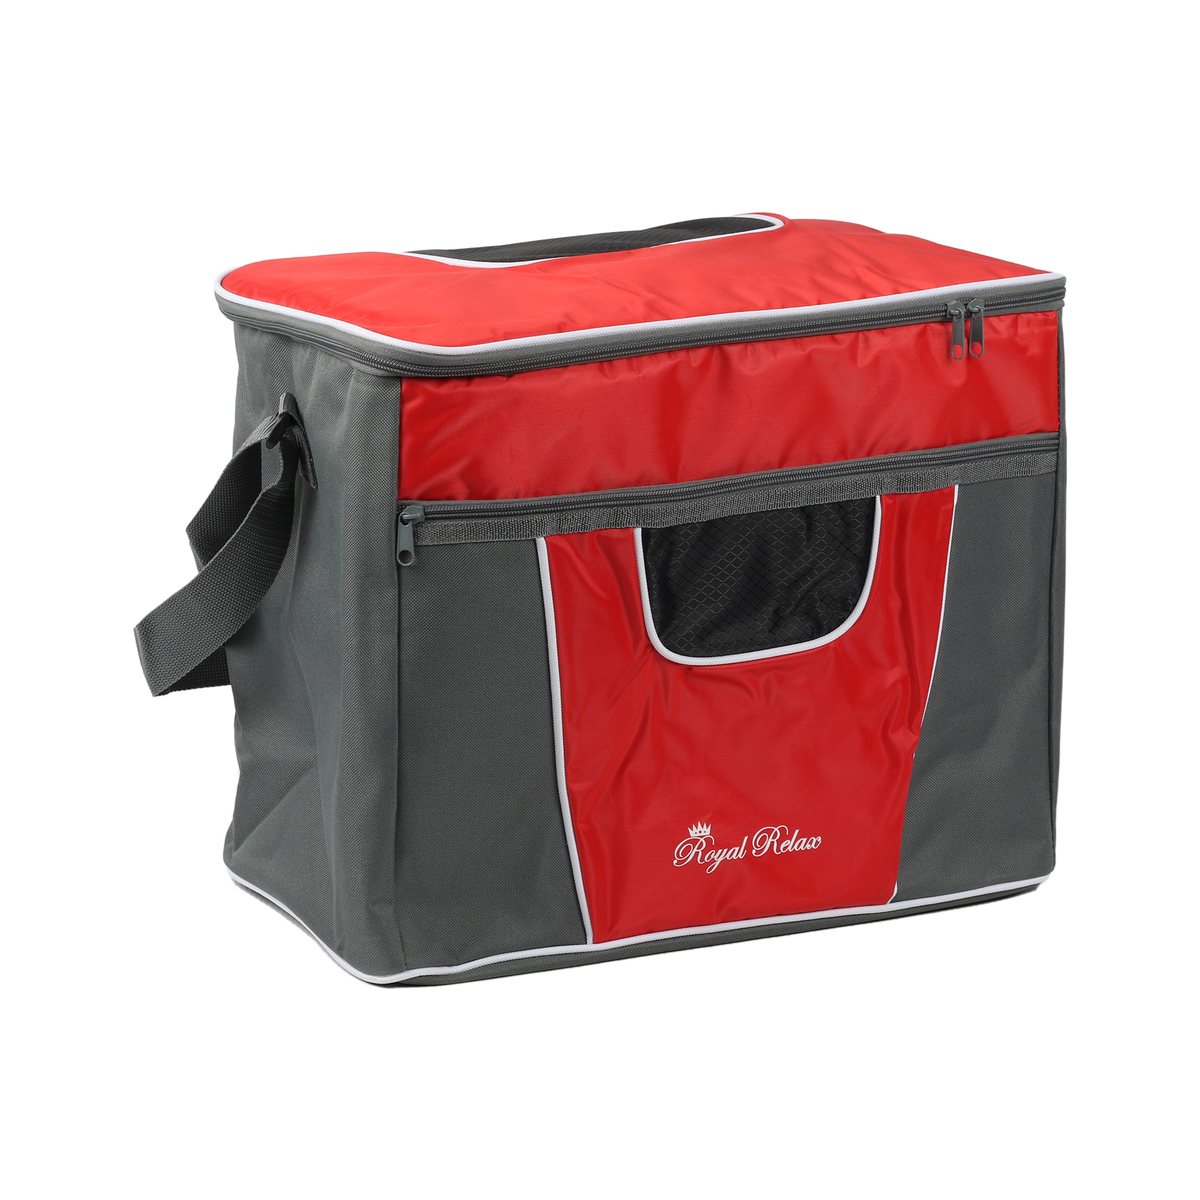 Relax Cooler Bag XY15026 35L Assorted Colors